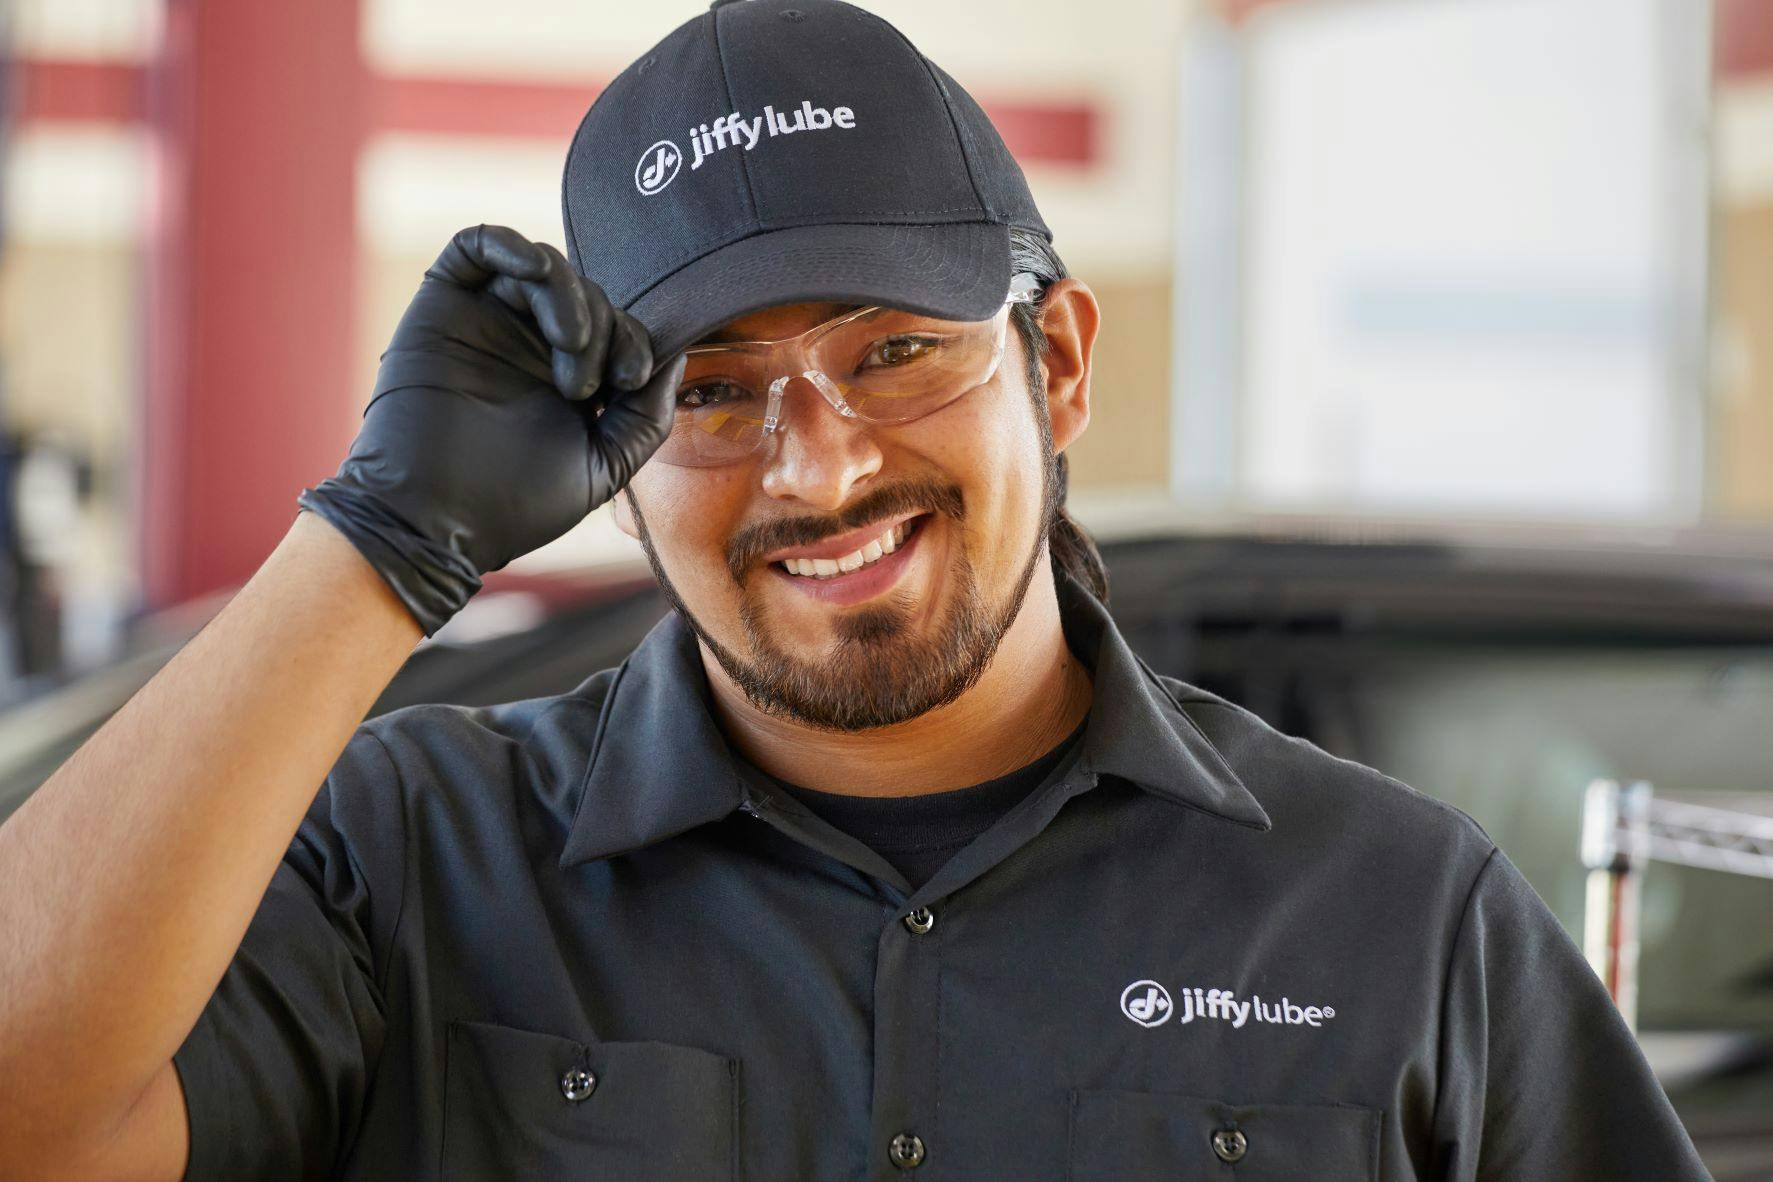 A Jiffy Lube service member with a warm, welcoming smile facing the camera, ready to check your tire pressure